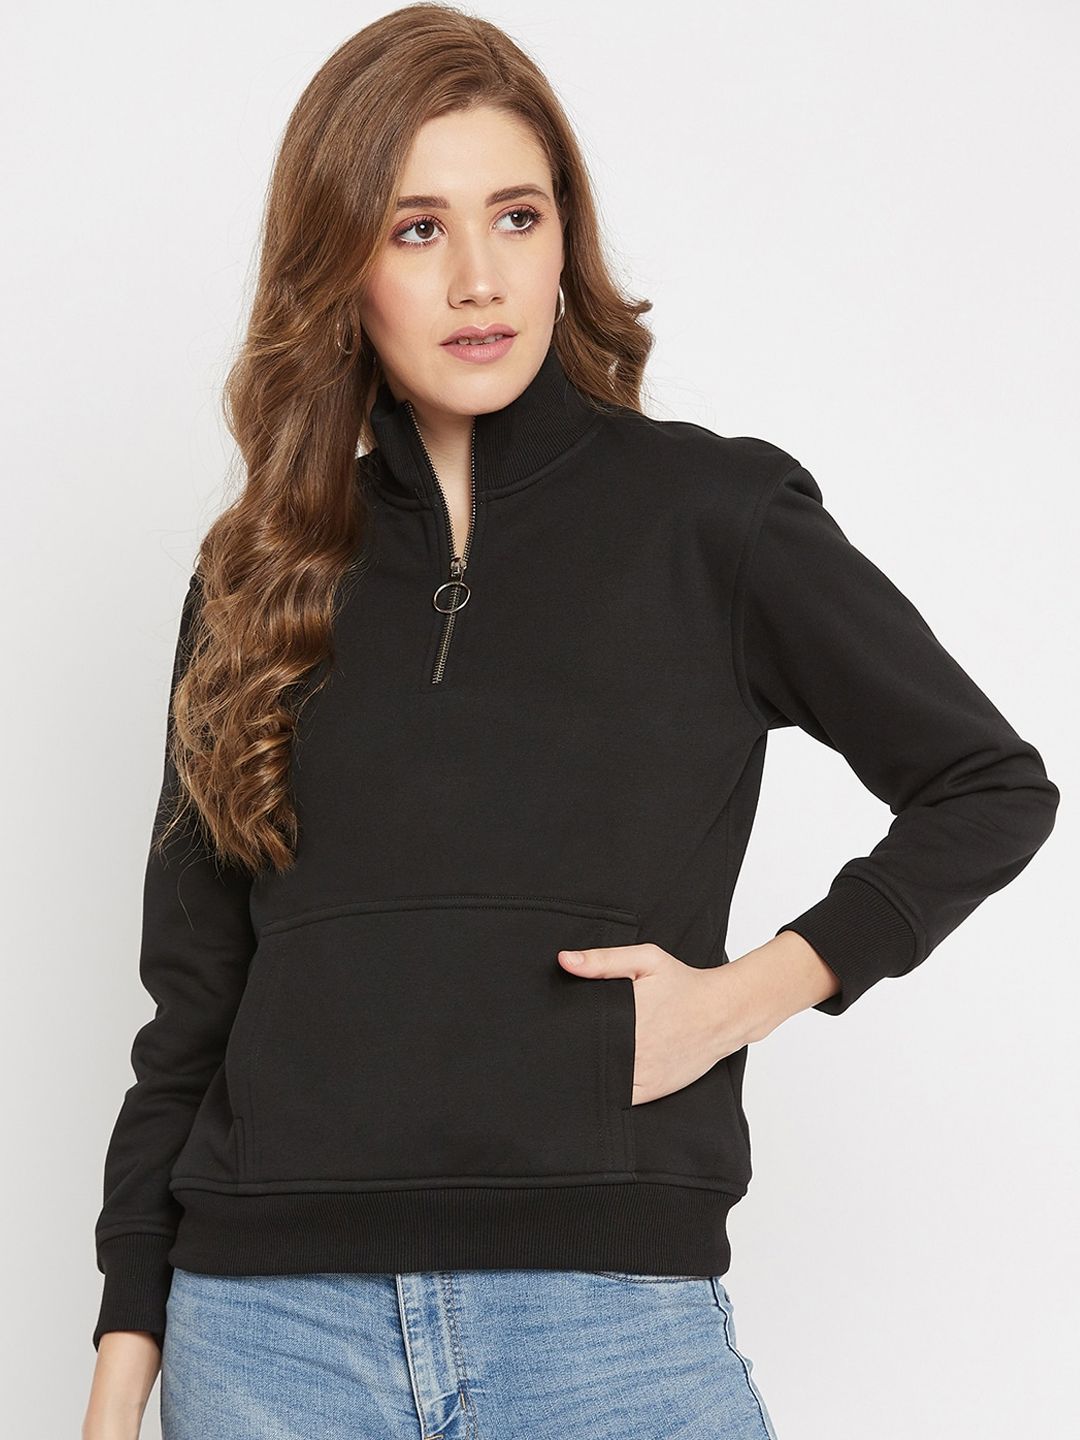 AGIL ATHLETICA Women Black Lightweight Bomber Jacket Price in India